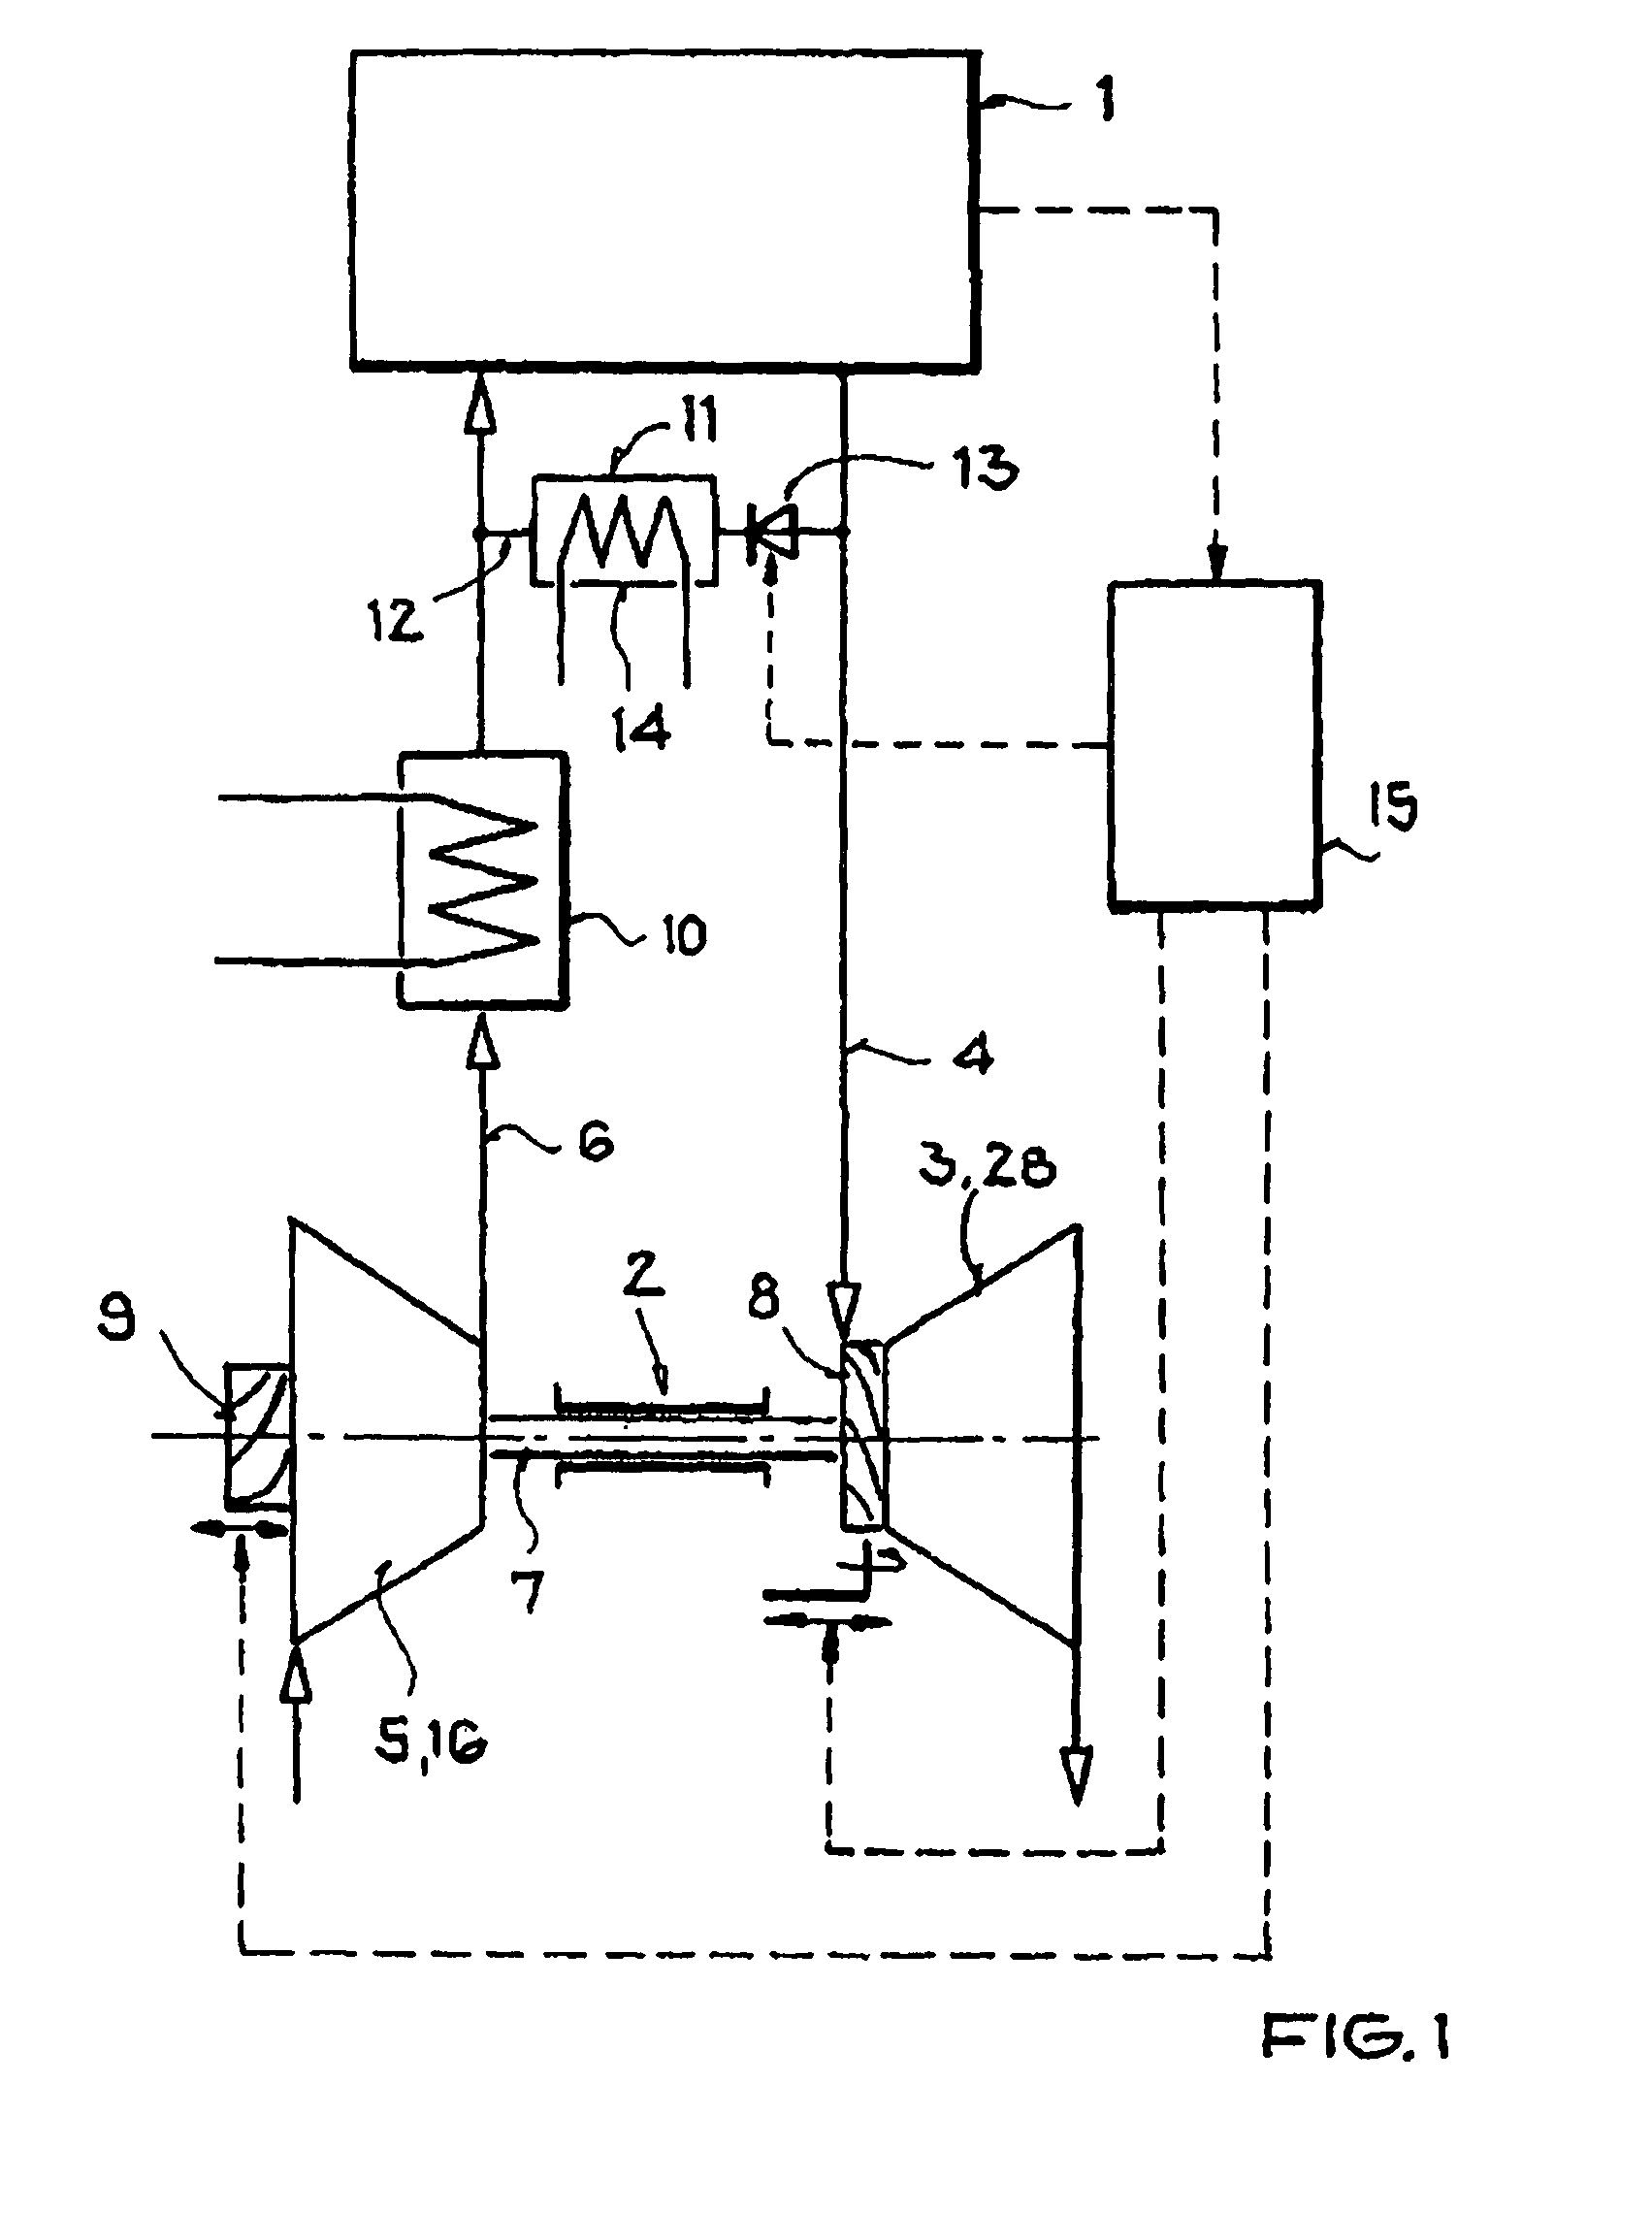 Exhaust gas turbocharger for an internal combustion engine